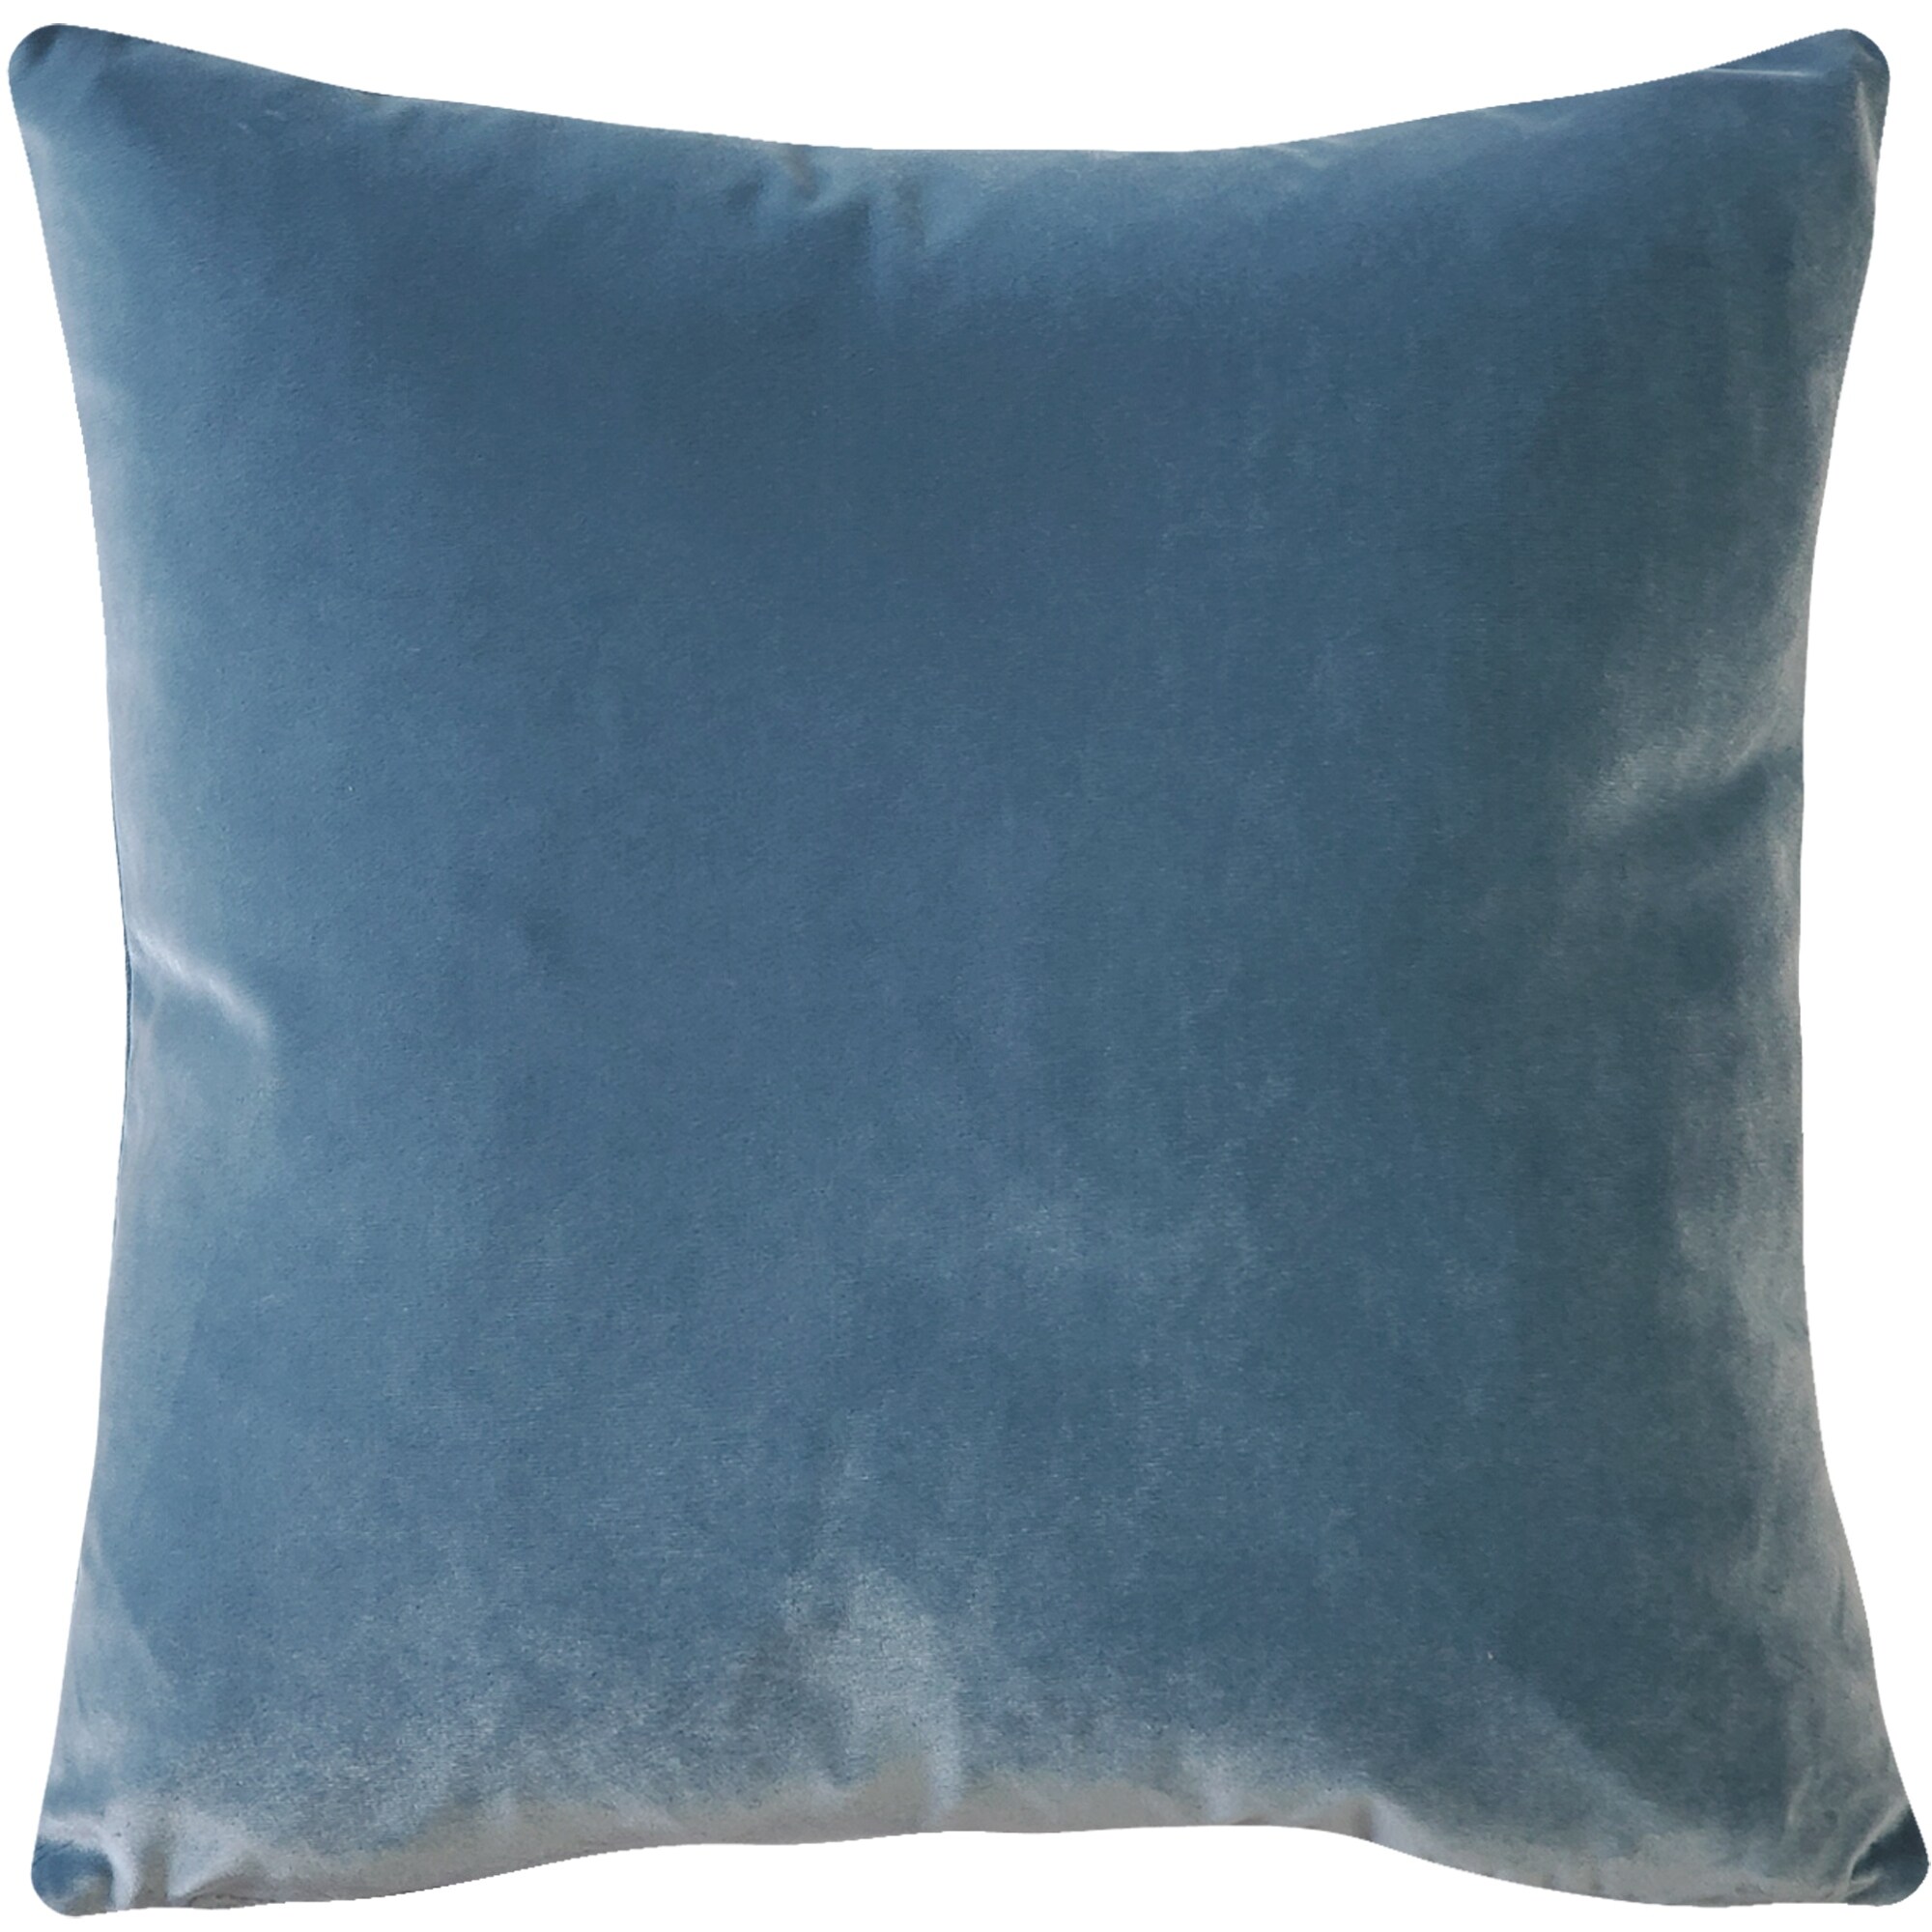 https://ak1.ostkcdn.com/images/products/is/images/direct/9bfb42638be7699c5ddb225b335436db325675f7/Pillow-Decor-Castello-Soft-Velvet-Throw-Pillows-%283-Sizes%2C-18-Colors%29.jpg